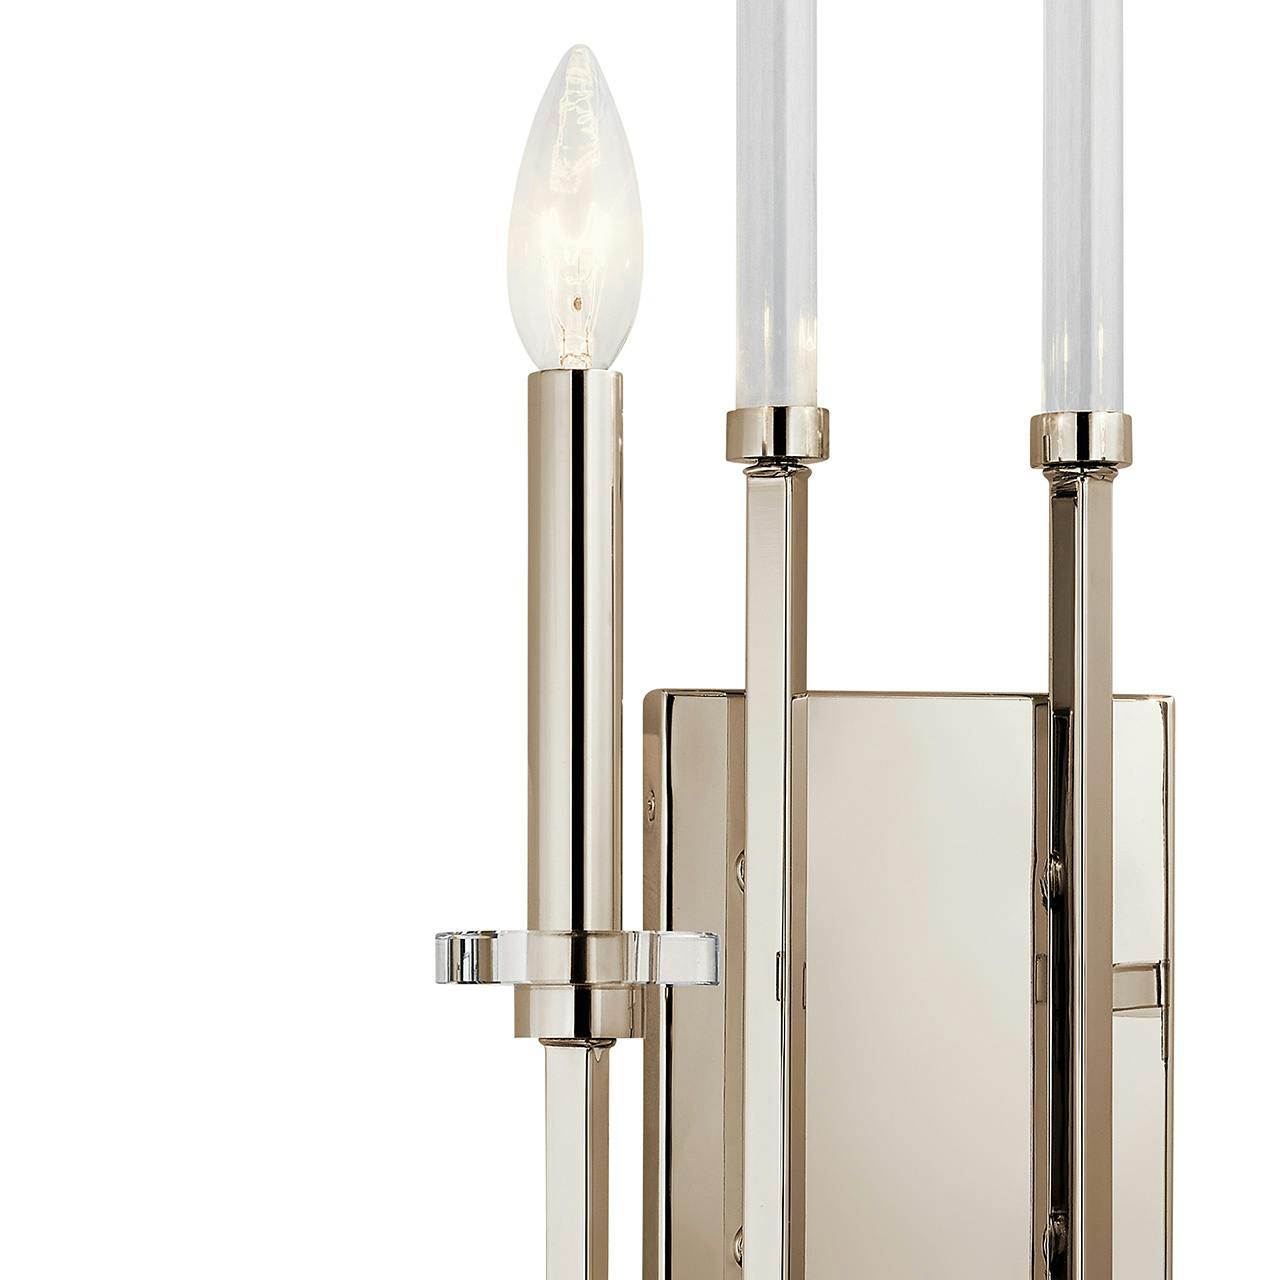 Close up view of the Kadas 22" 2 Light Sconce Nickel on a white background